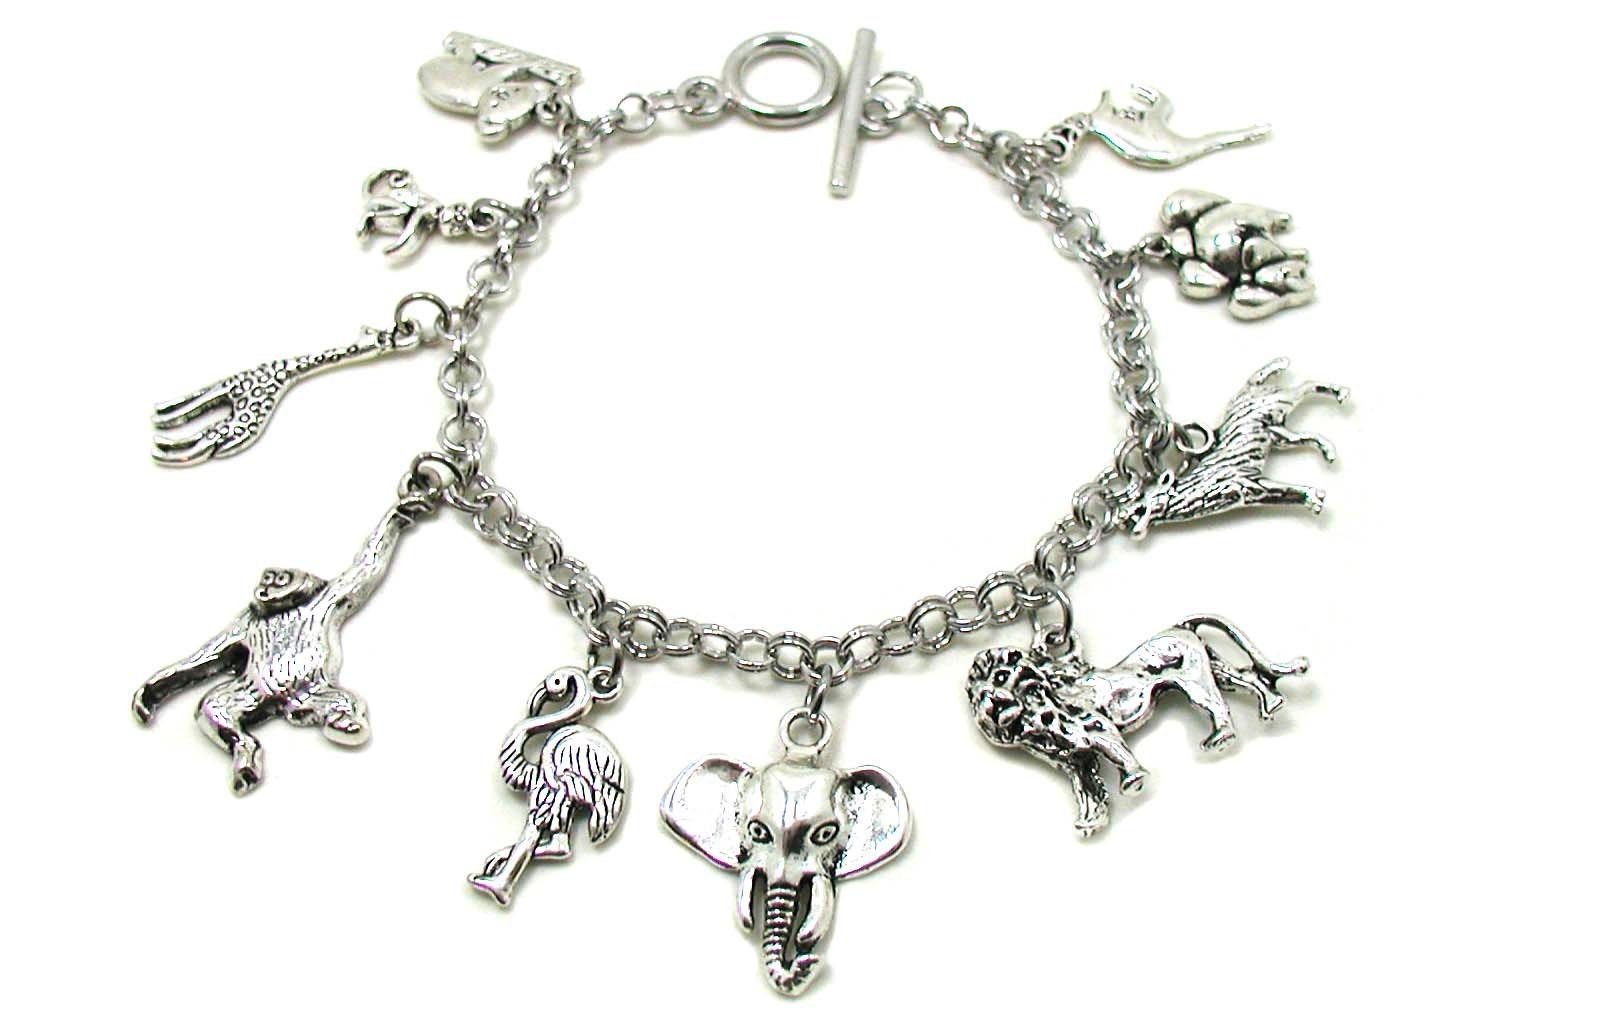 Woodland Creature Charm Bracelet - Sterling Silver Bracelet with Fores –  Mark Poulin Jewelry